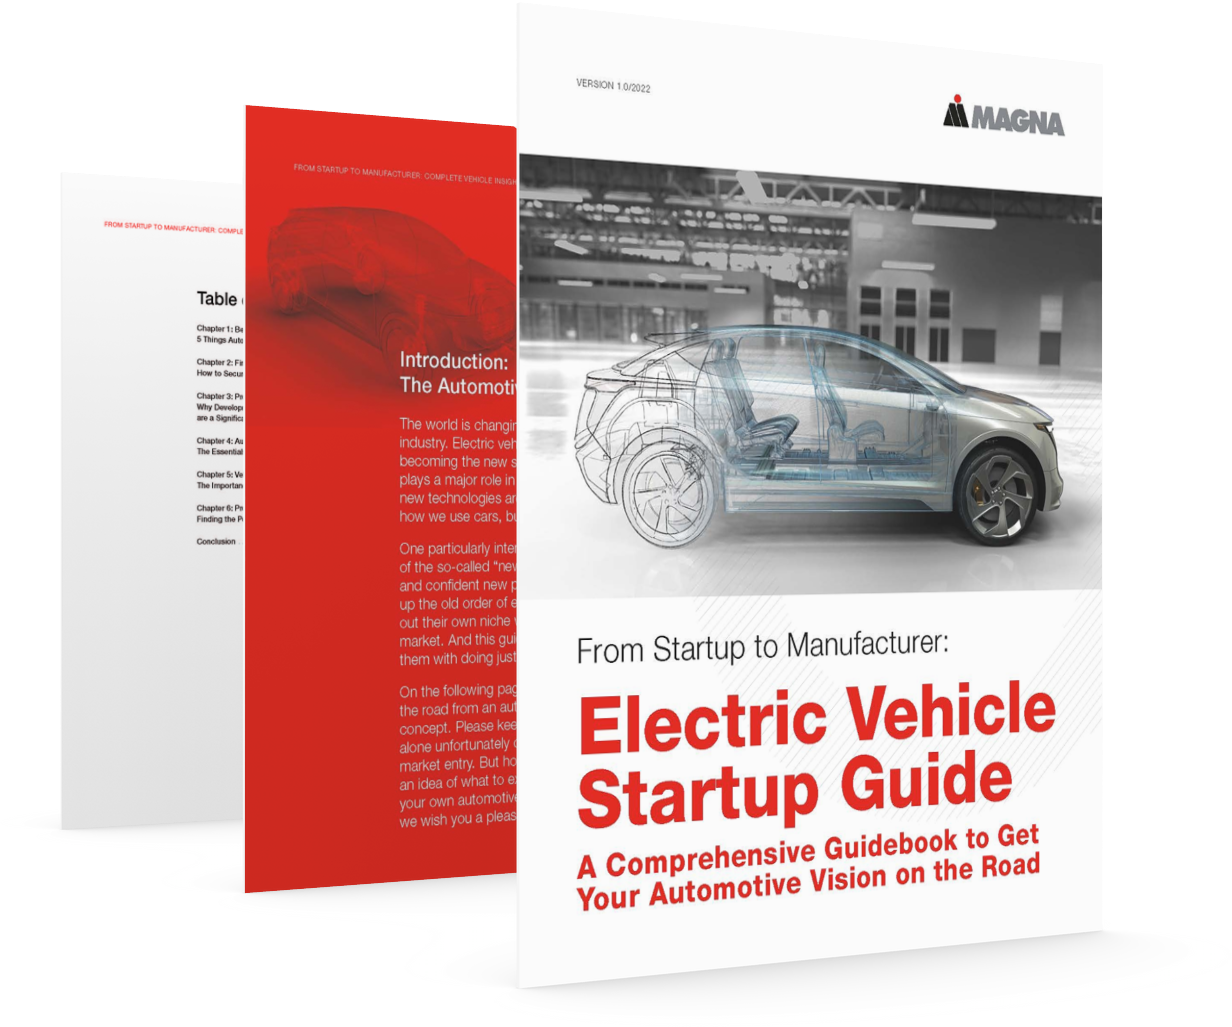 Magna Electric Vehicle Startup Gude